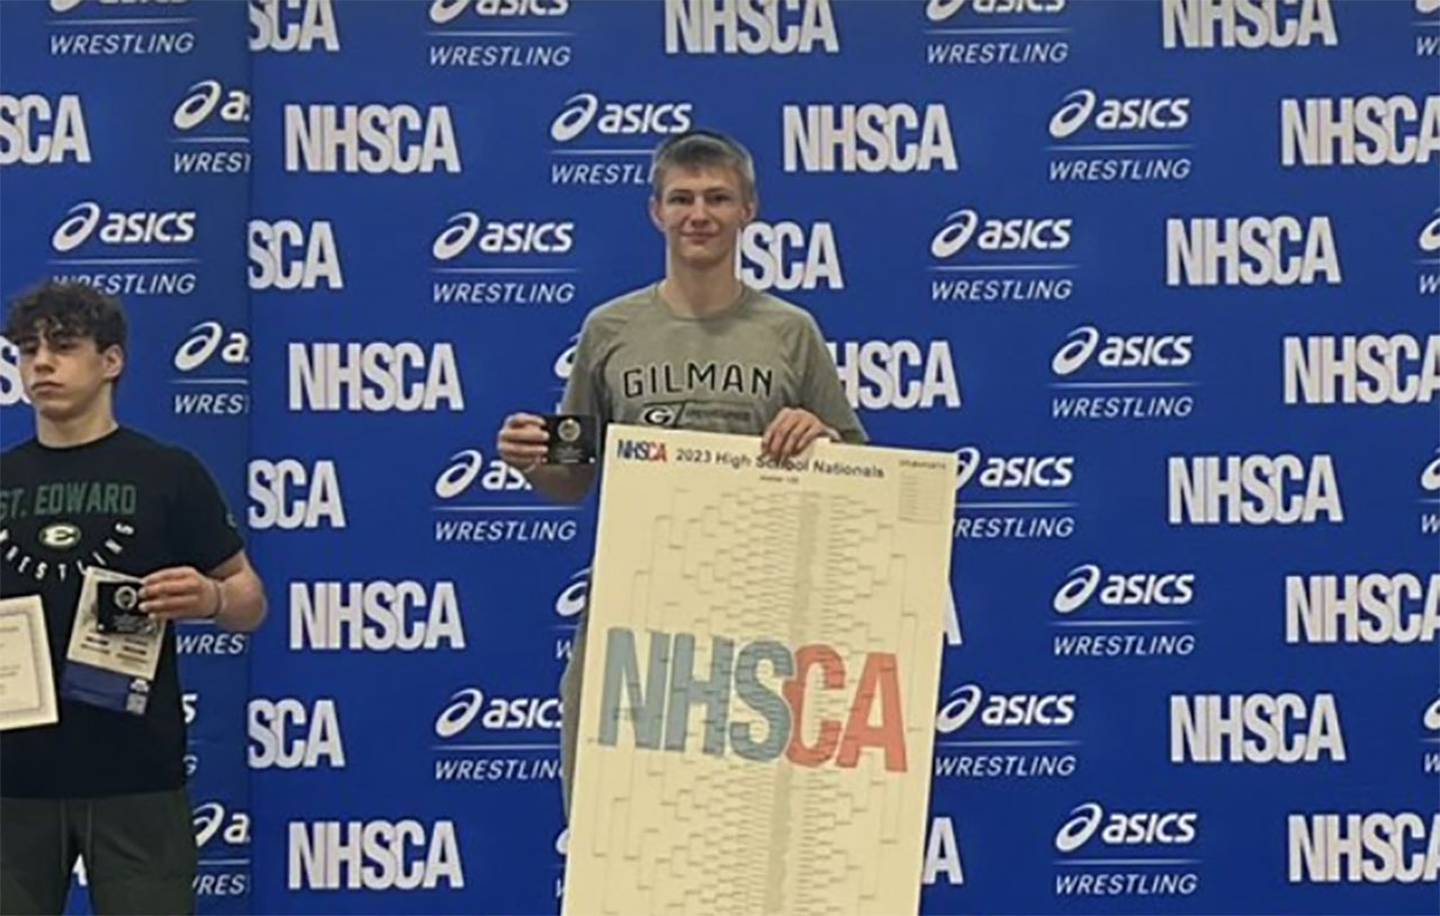 Gilman's Tyson Sherlock stands atop the podium after going 7-0 and winning the 132lbs. weight class at the NHSCA wrestling nationals in Virginia Beach, Virginia.